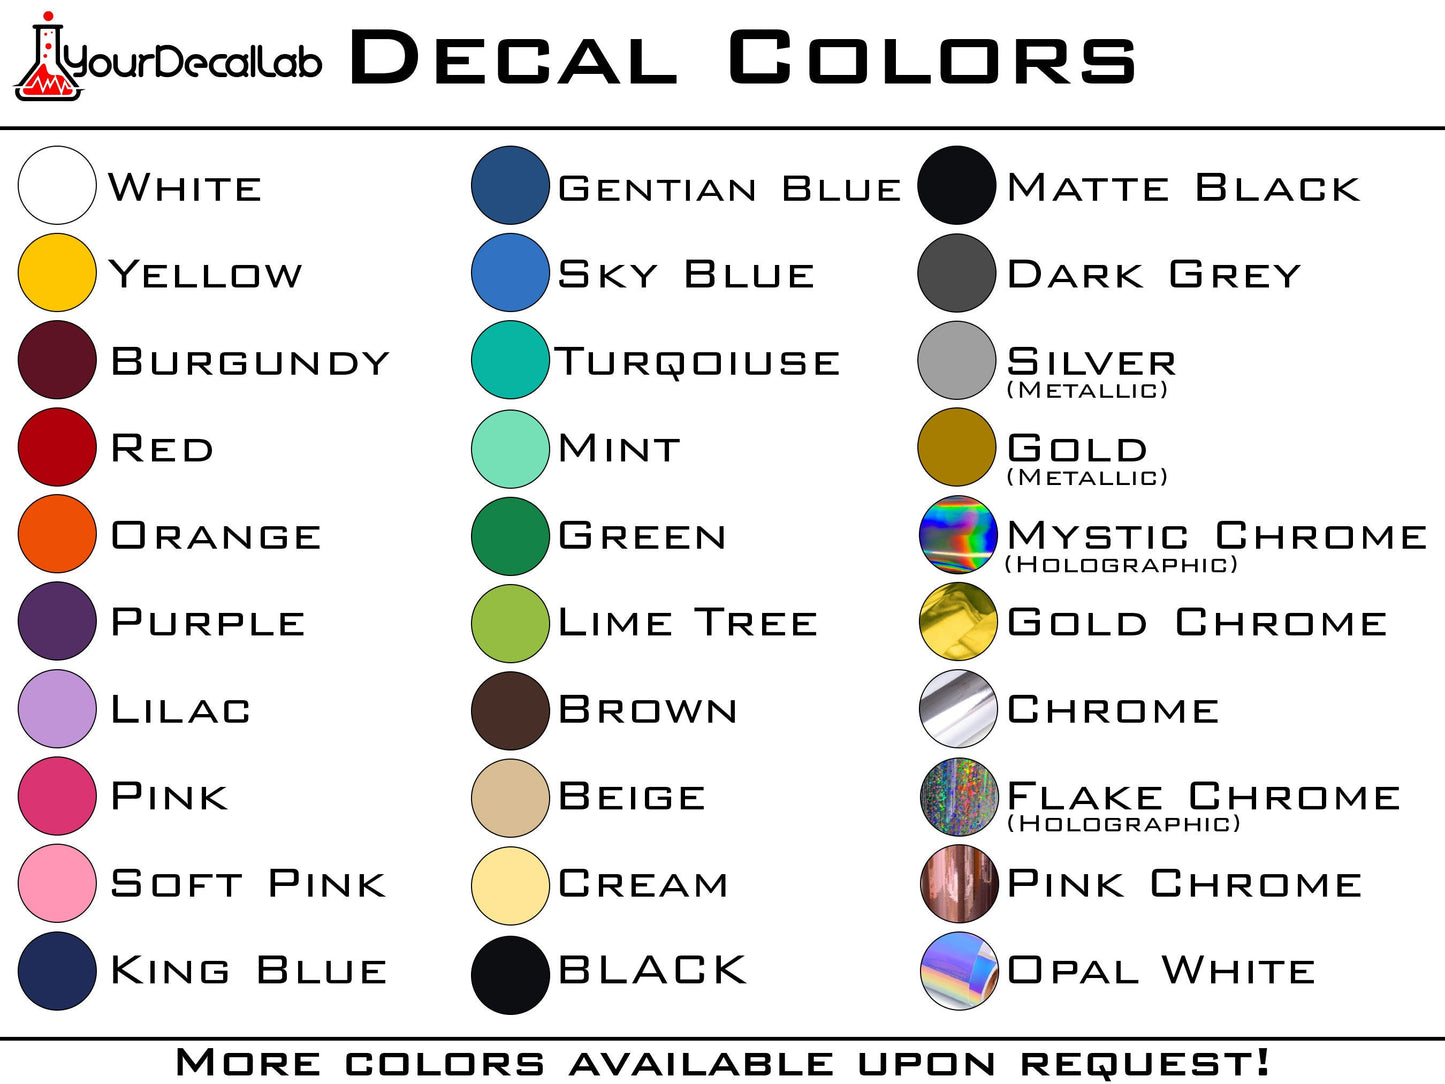 24 Valve 3rd Gen Grille Decal - Many Colors & Sizes